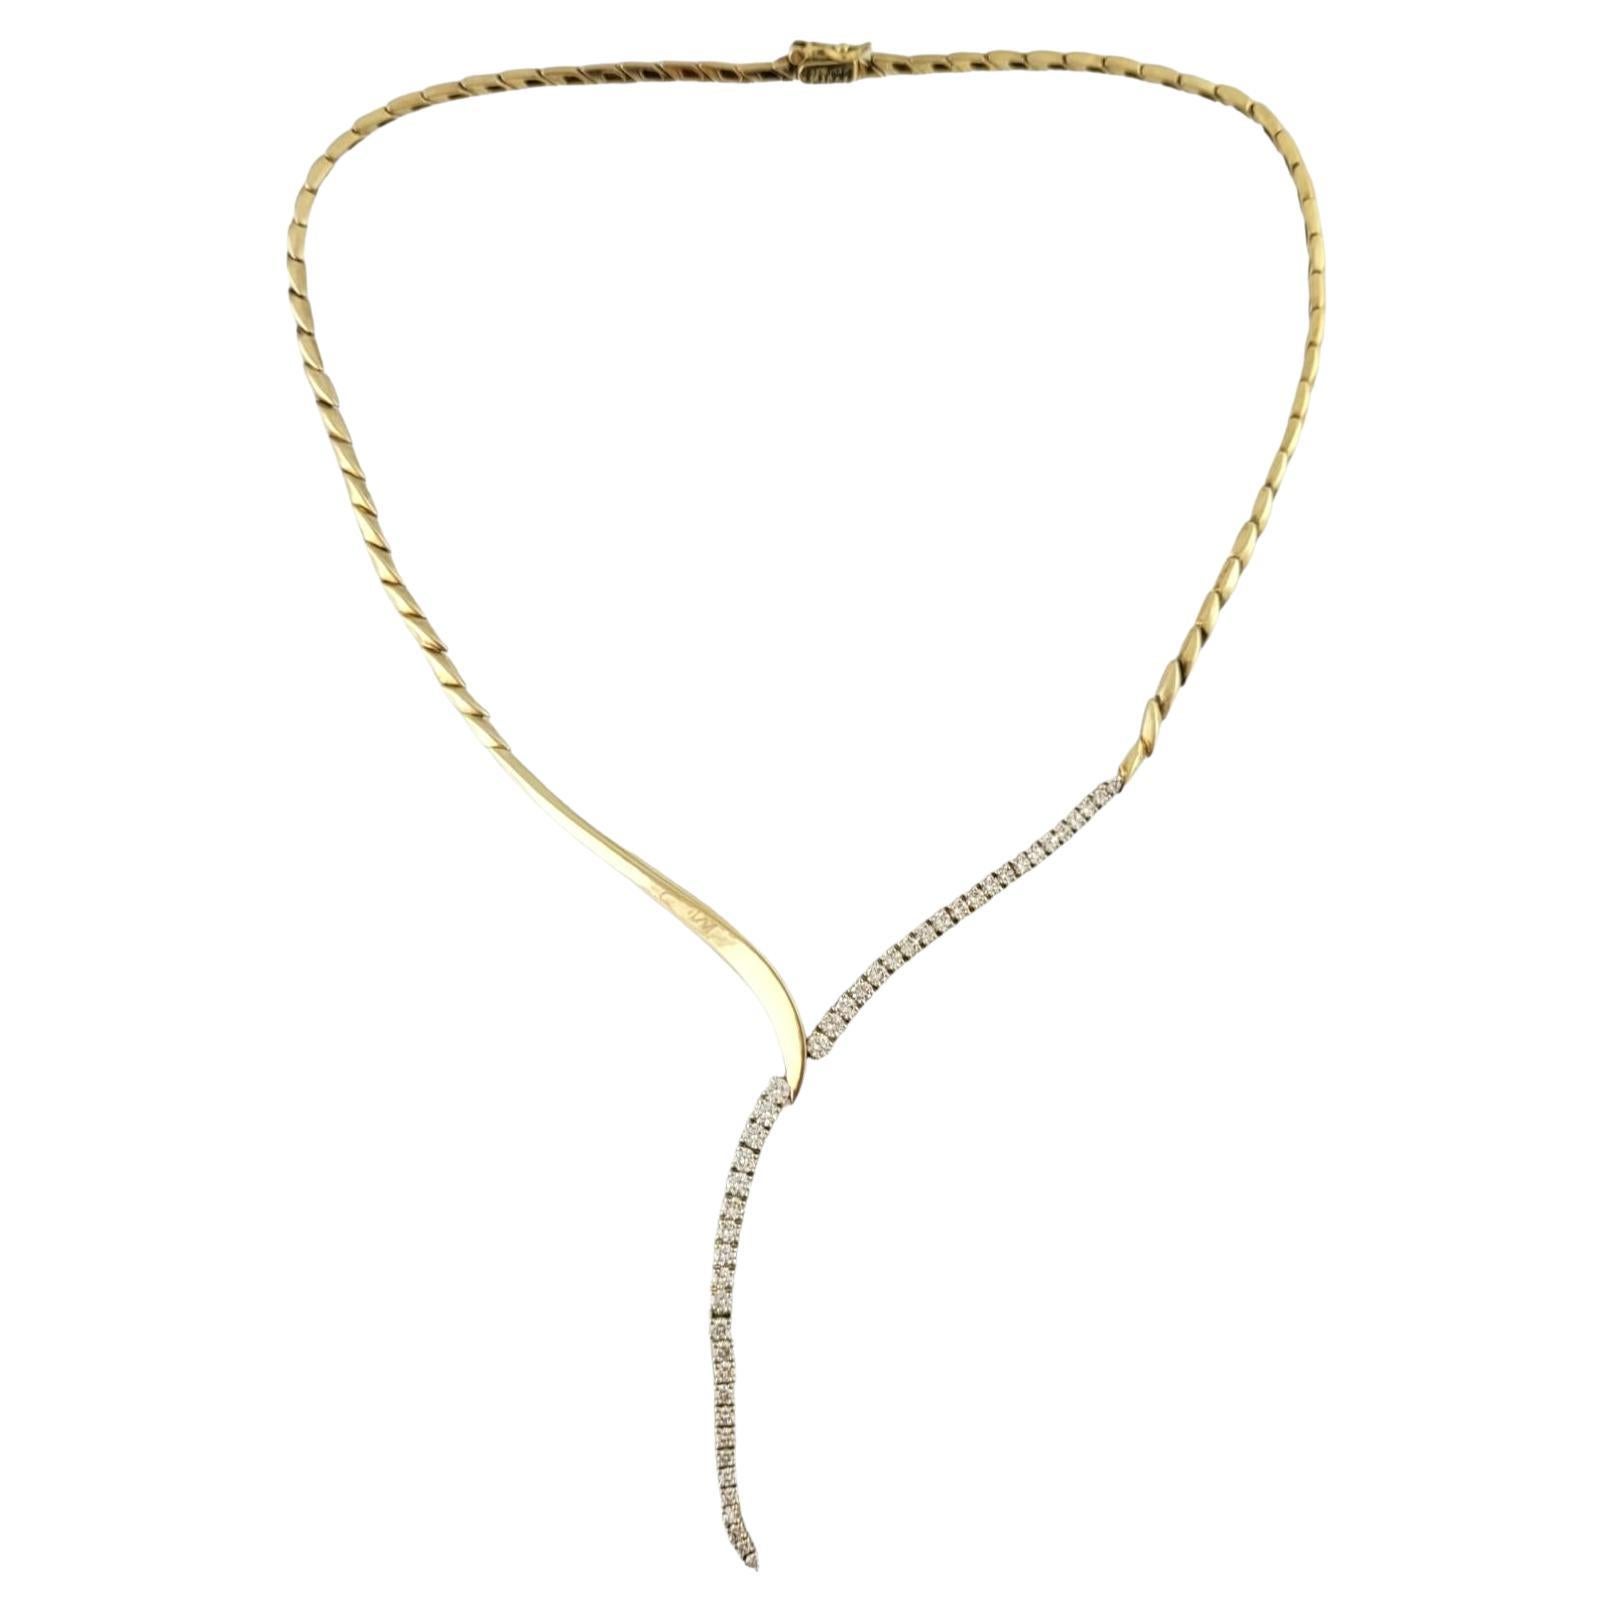 Jose Hess 14 Karat Yellow Gold and Diamond Y Necklace #16969 For Sale